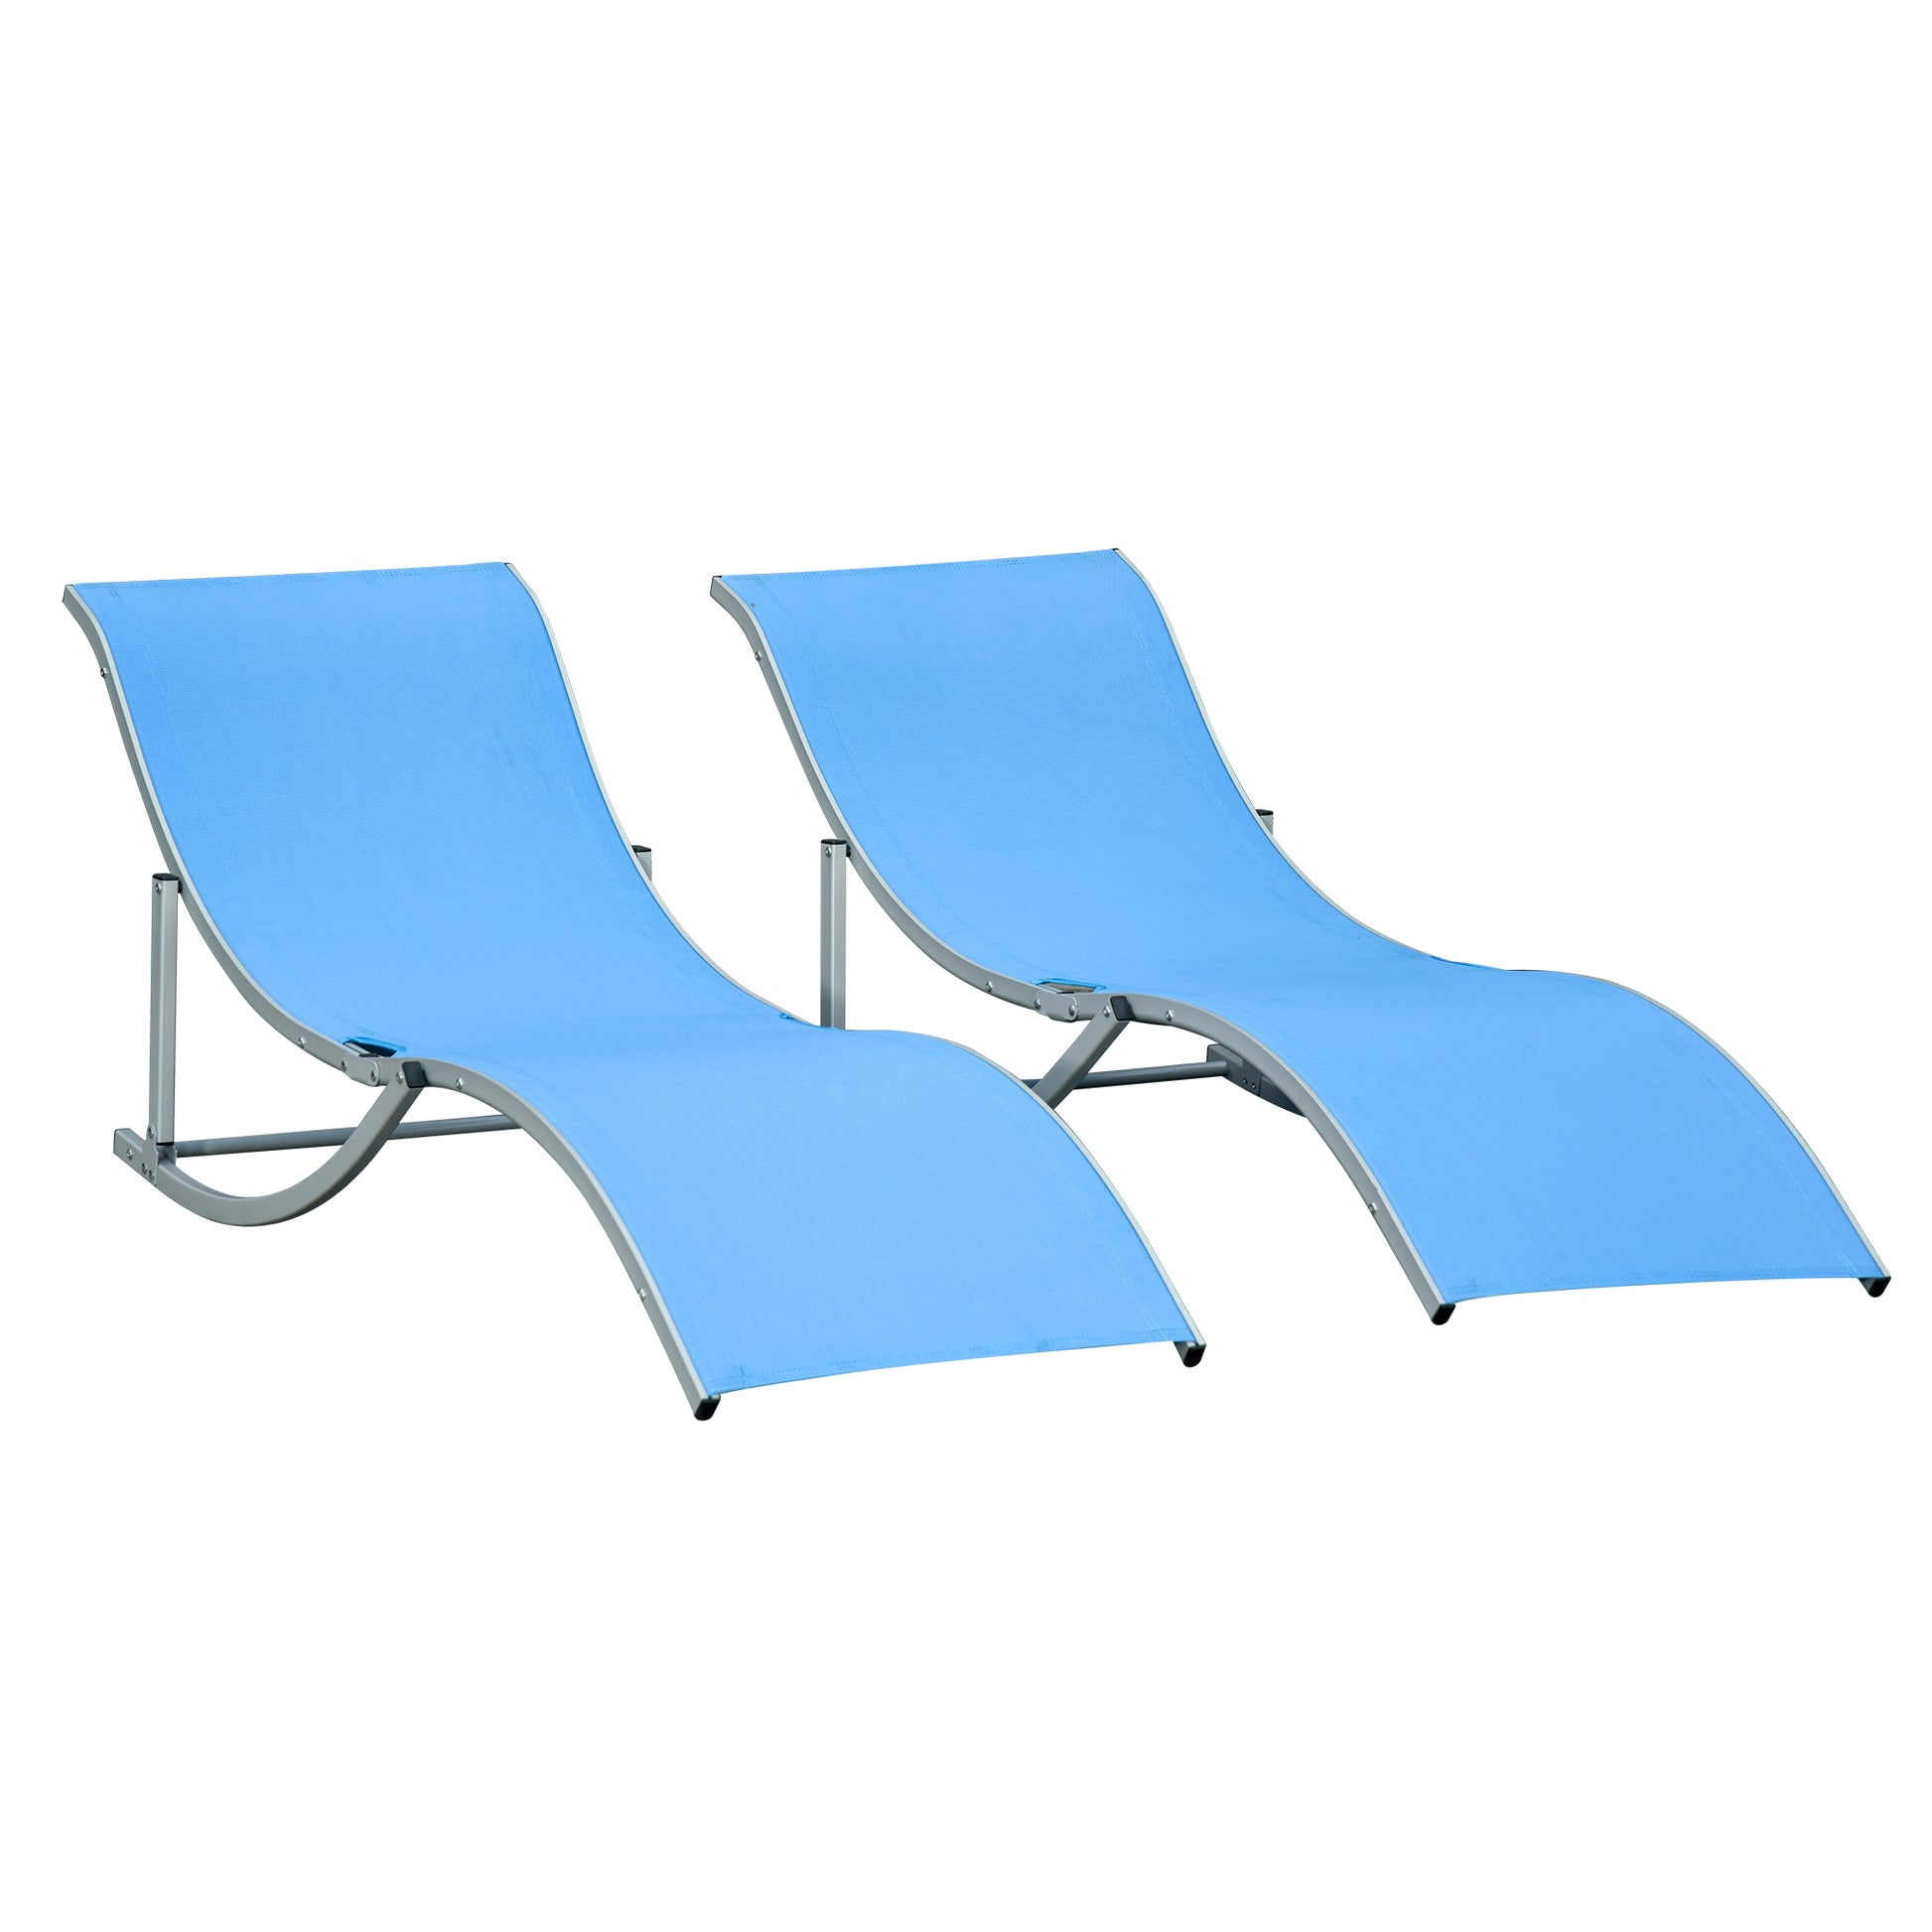 Pool Chaise Lounge Chairs Set of 2, S-shaped Foldable Outdoor Chaise Lounge Chair Reclining for Patio Beach Garden With 264lbs Weight Capacity, Blue at Gallery Canada